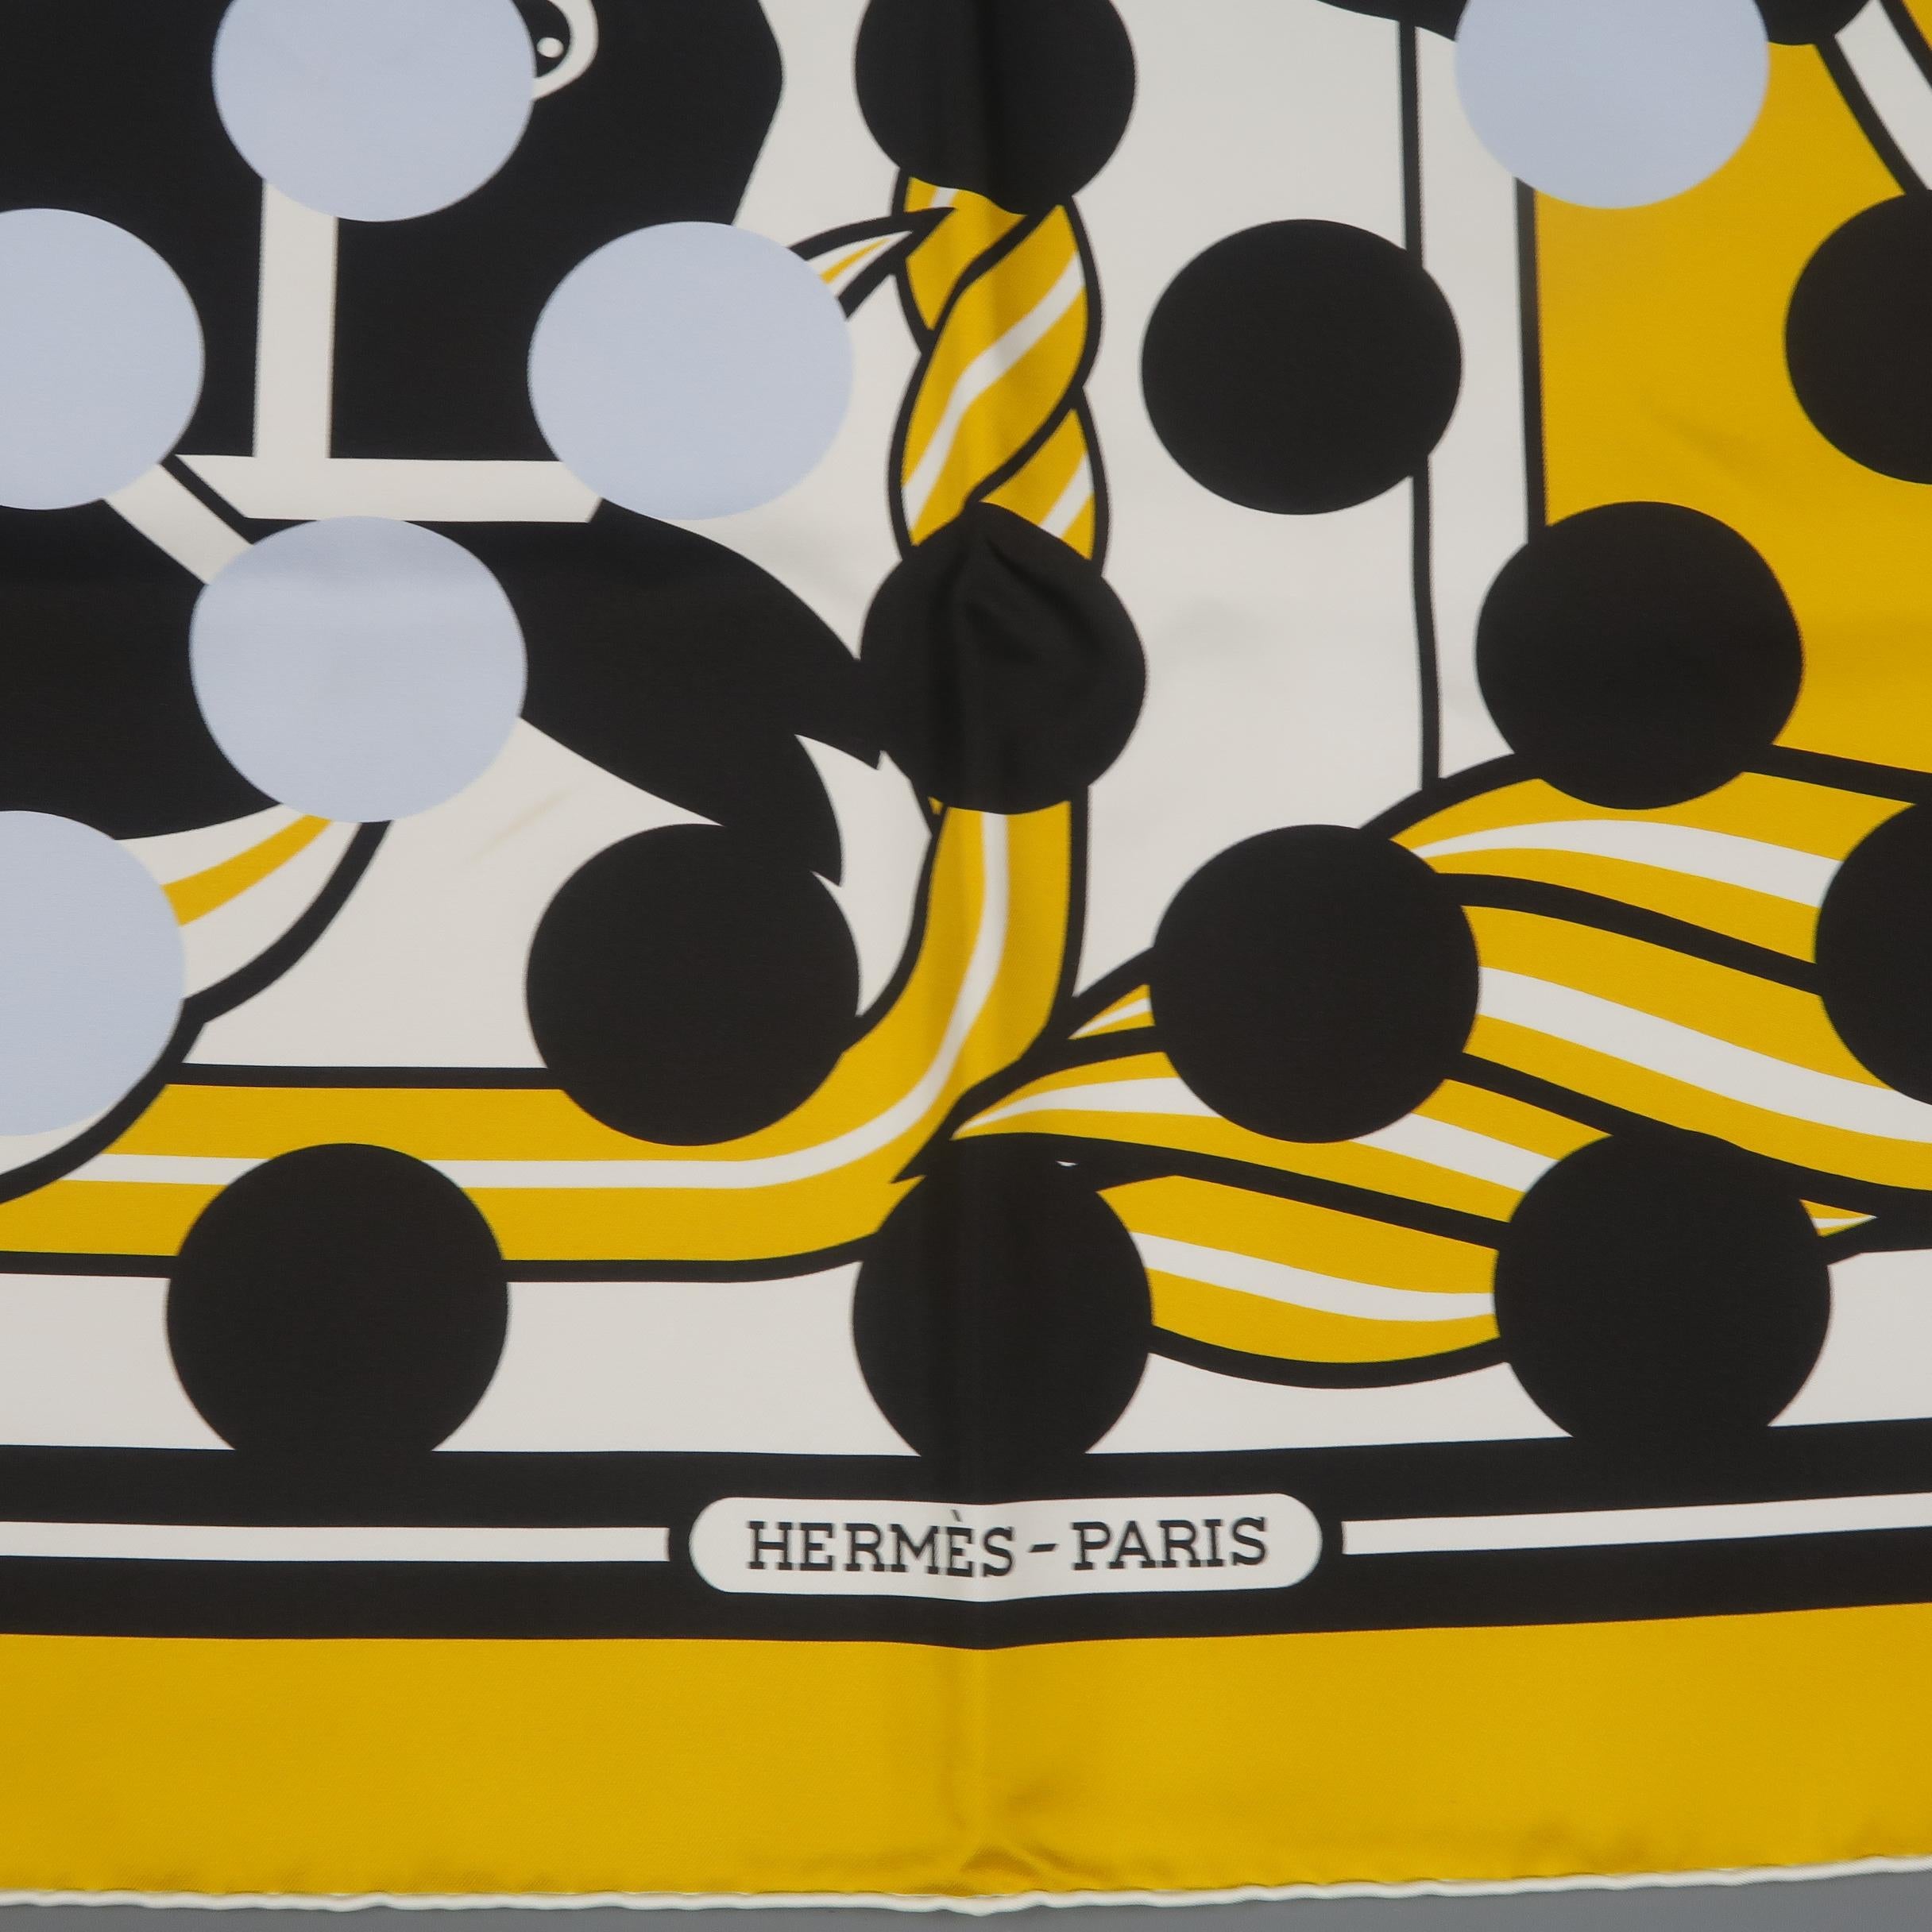 This rare and collectable HERMES X COMME des GARCONS collaboration scarf comes in gold, black, and cream 